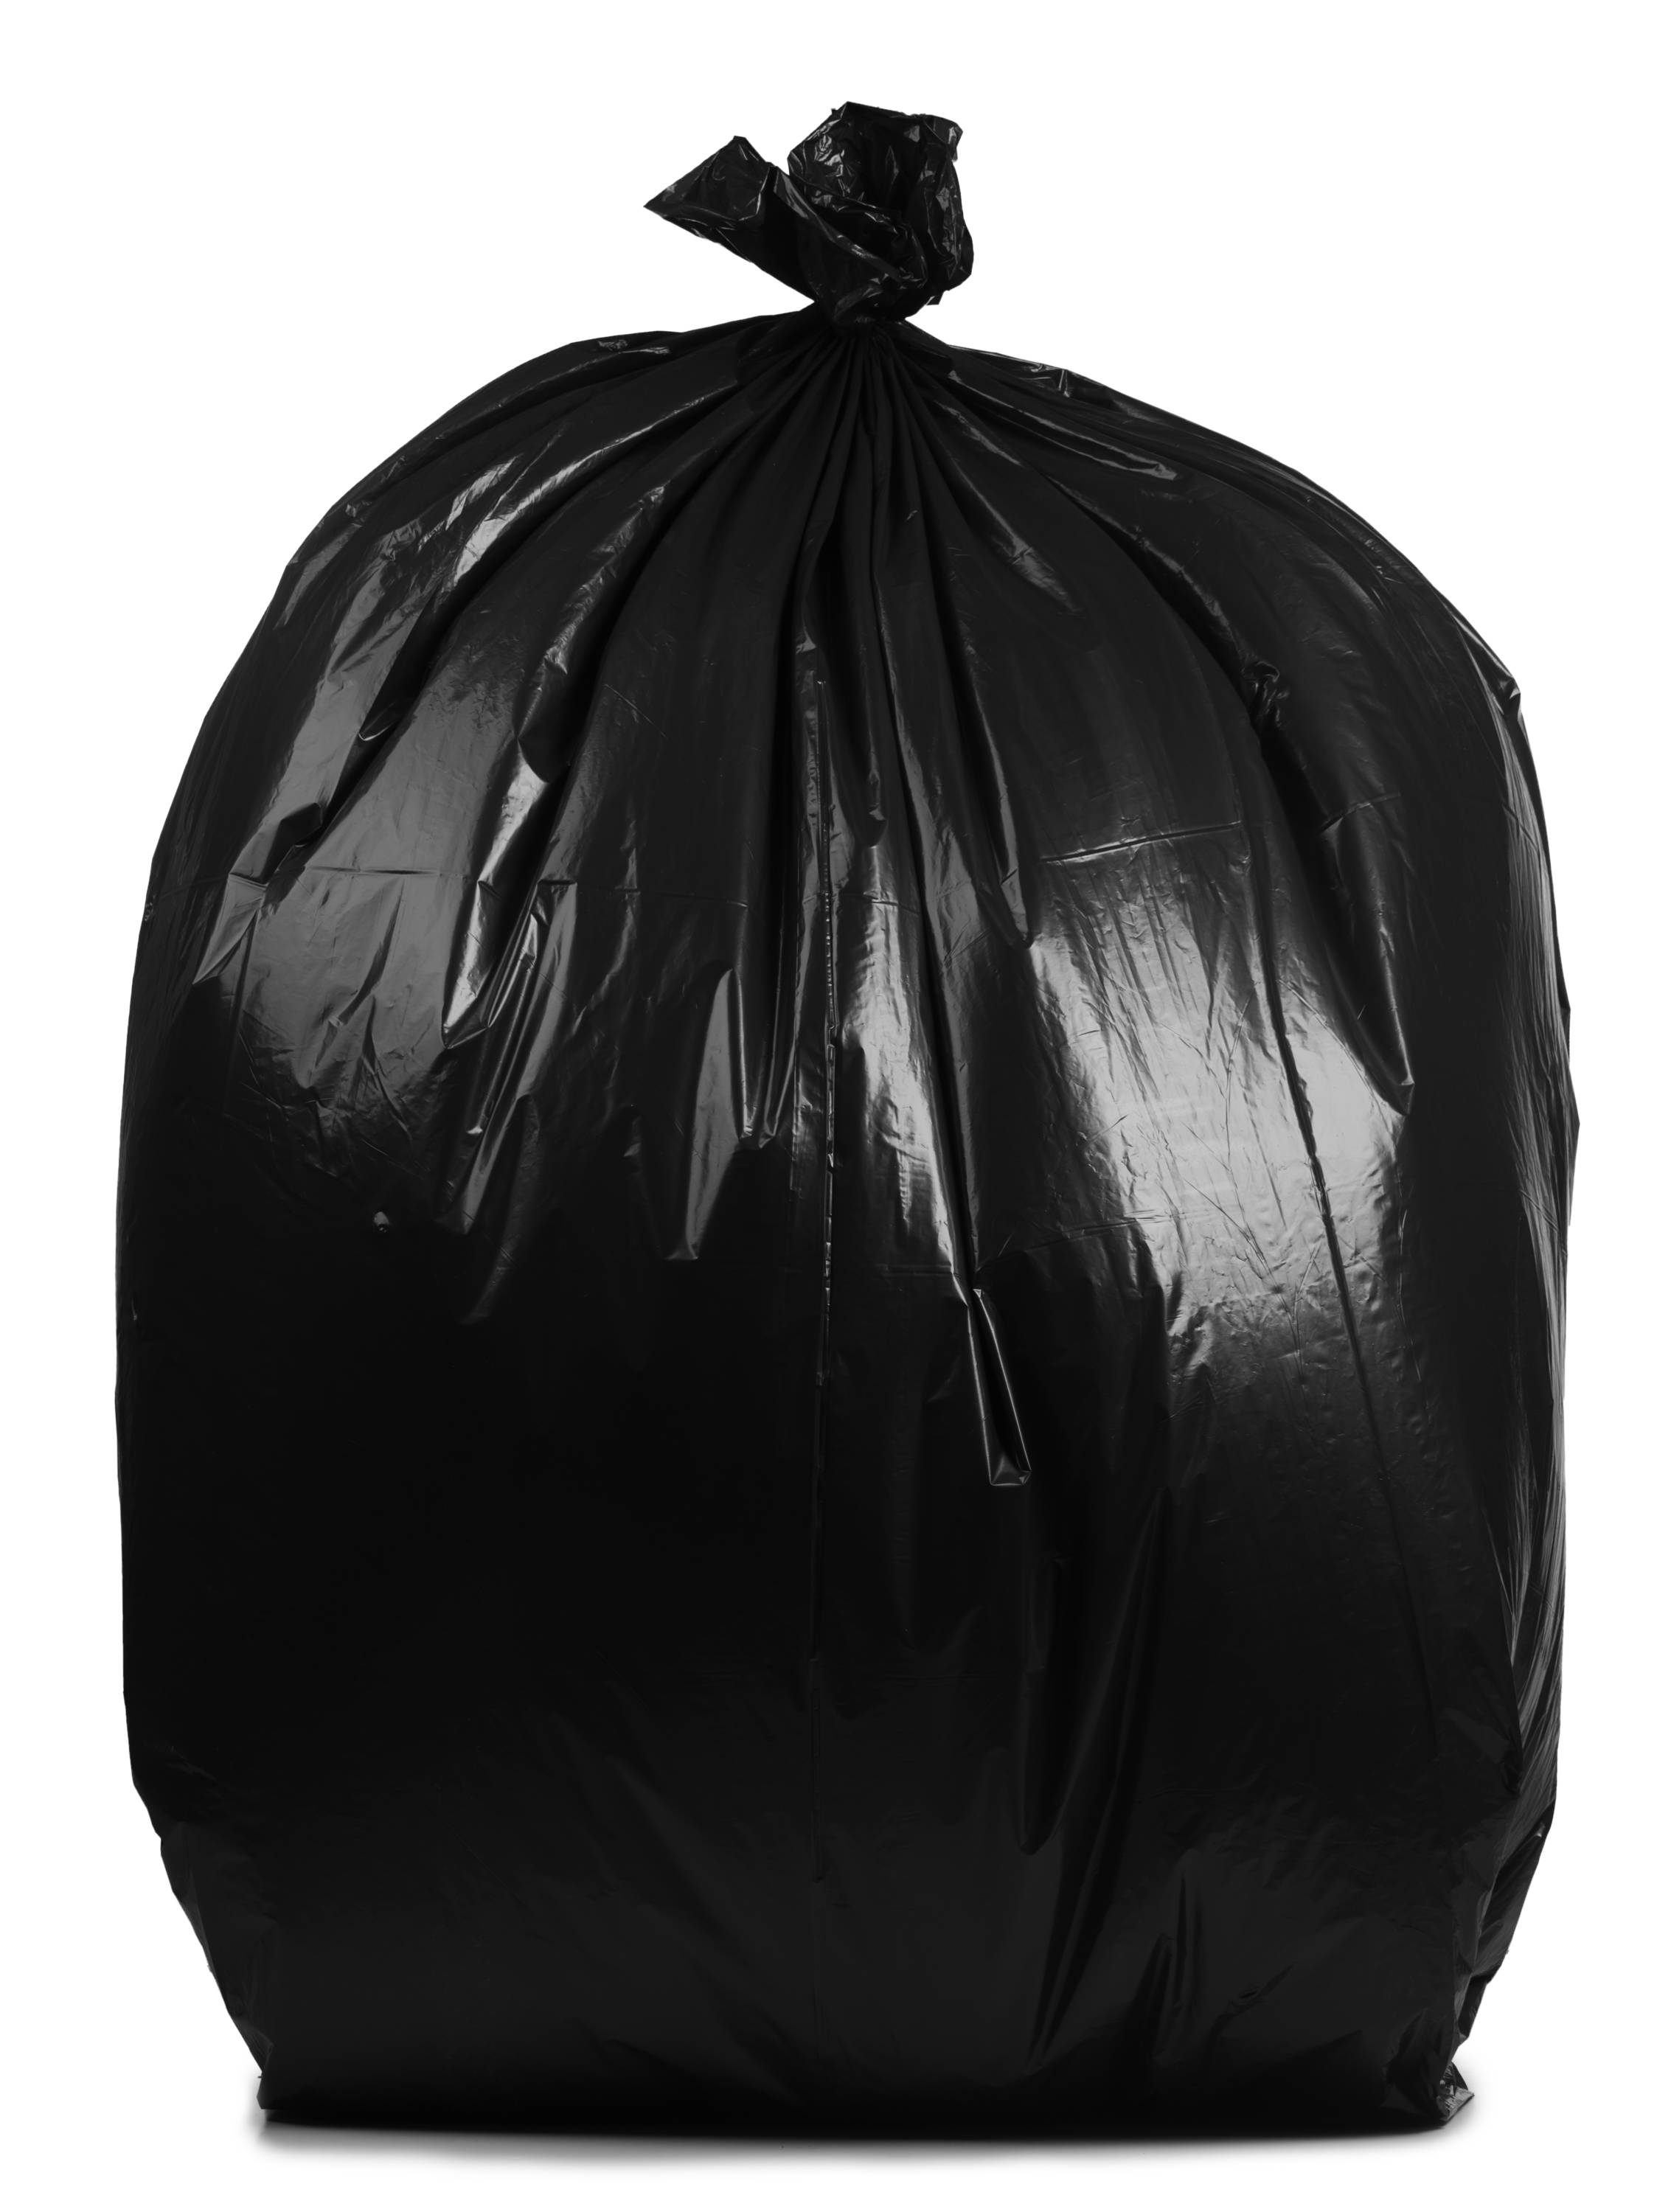 100 x HEAVY DUTY BLACK REFUSE SACKS STRONG THICK RUBBISH 5 PACKS OF 20 BIN LINER 